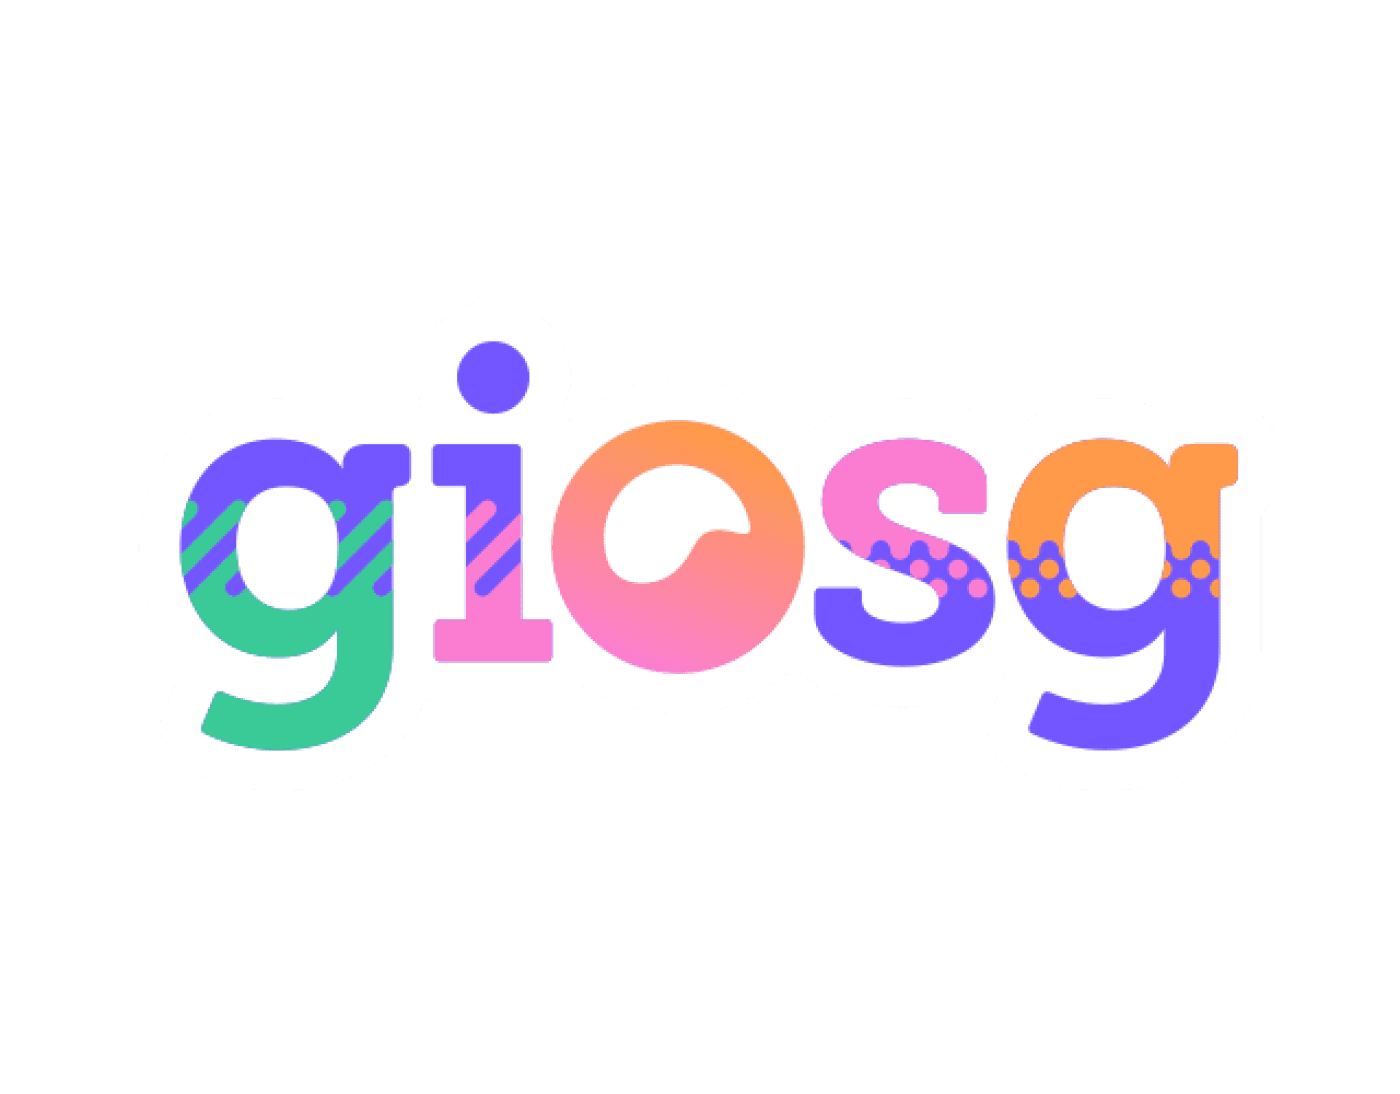 giosg-640x500-01.png